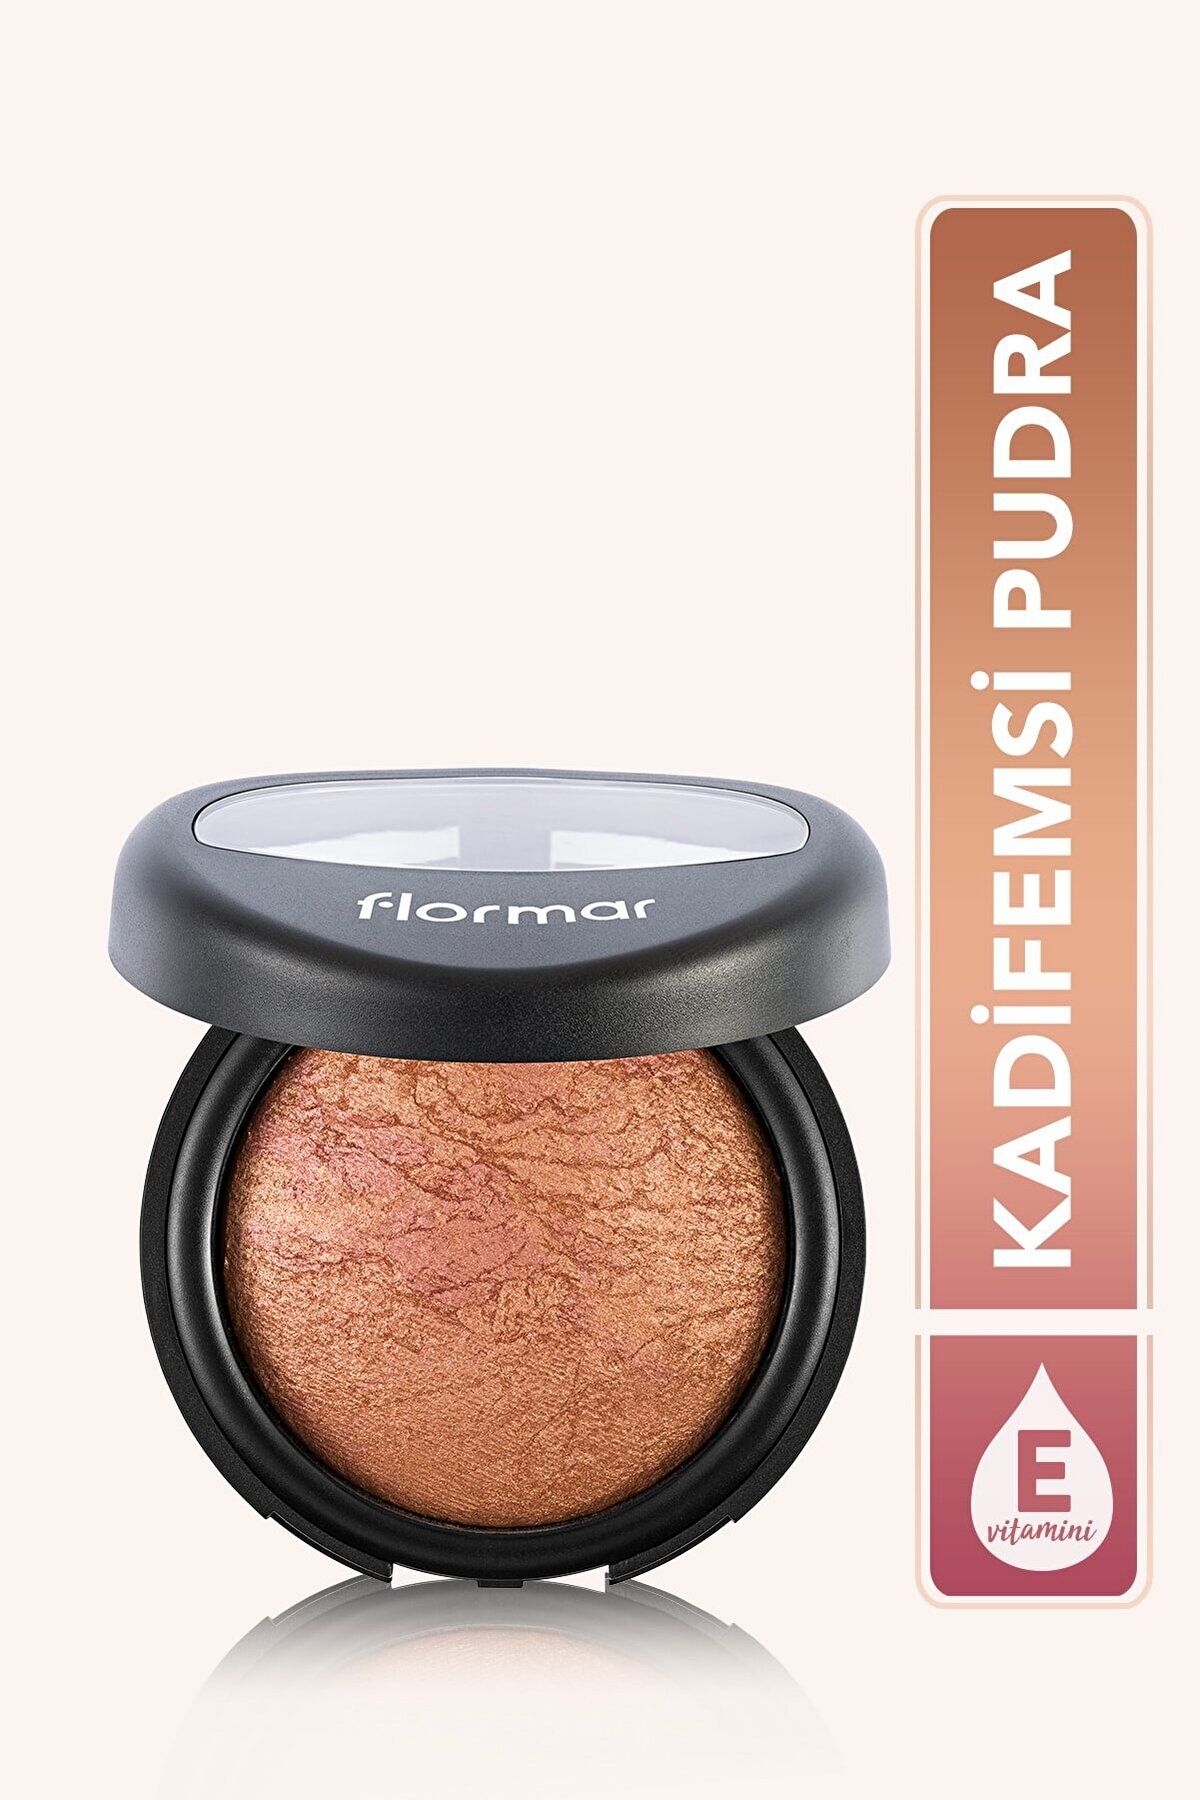 Flormar PUDRA BAKED - 26